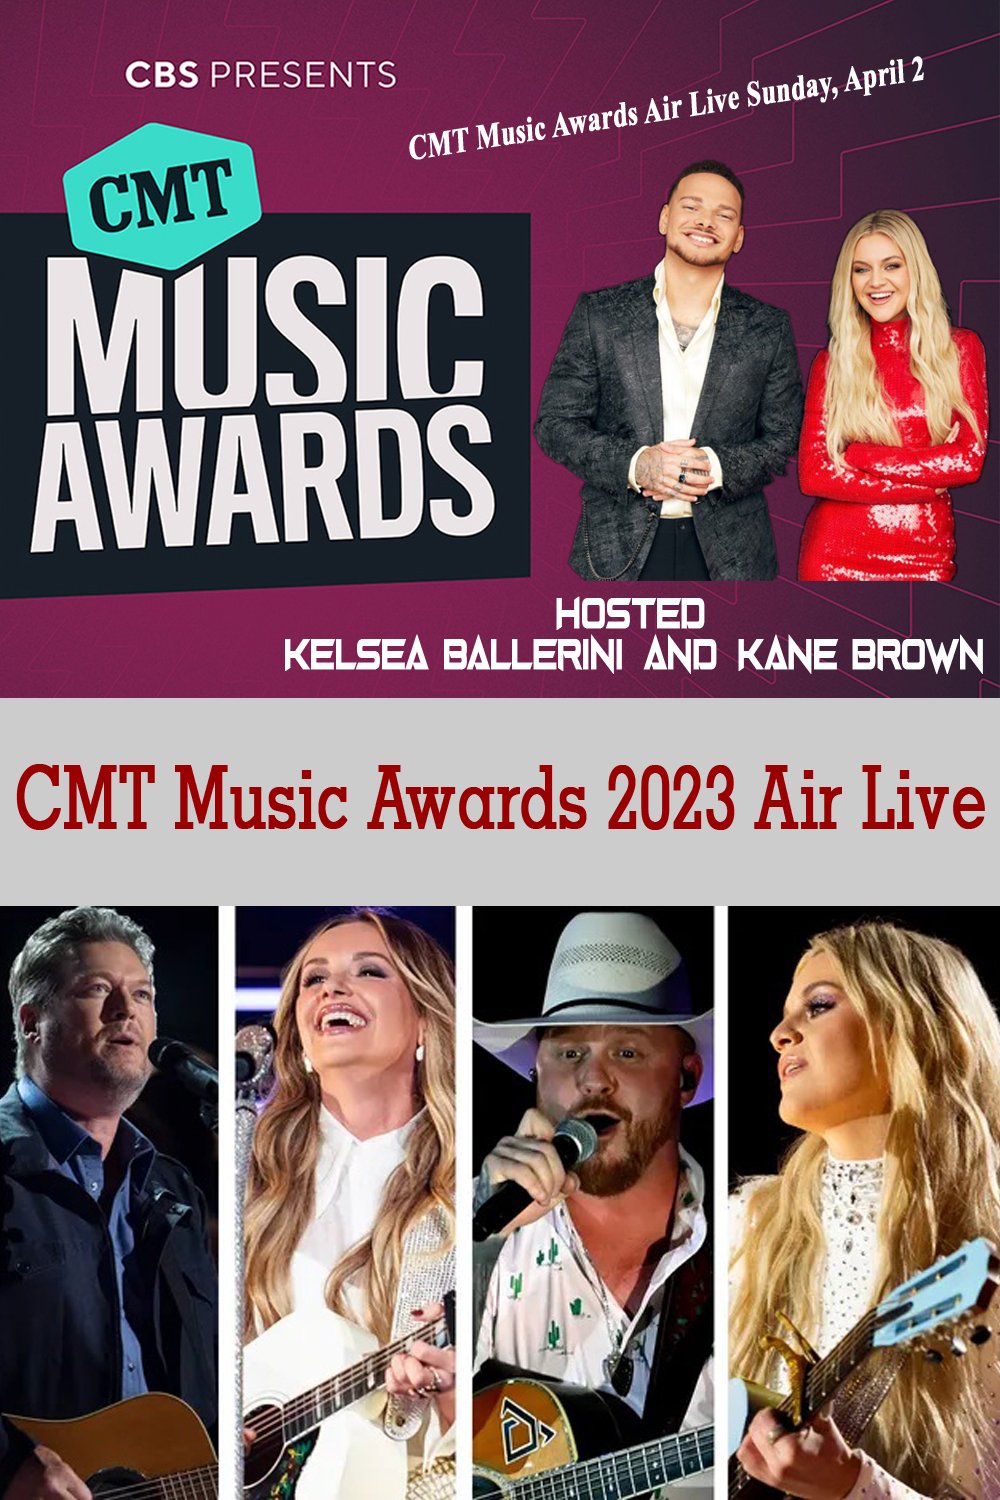 How Can I Watch CMT Music Awards 2023 Air Live SMGB TODAY